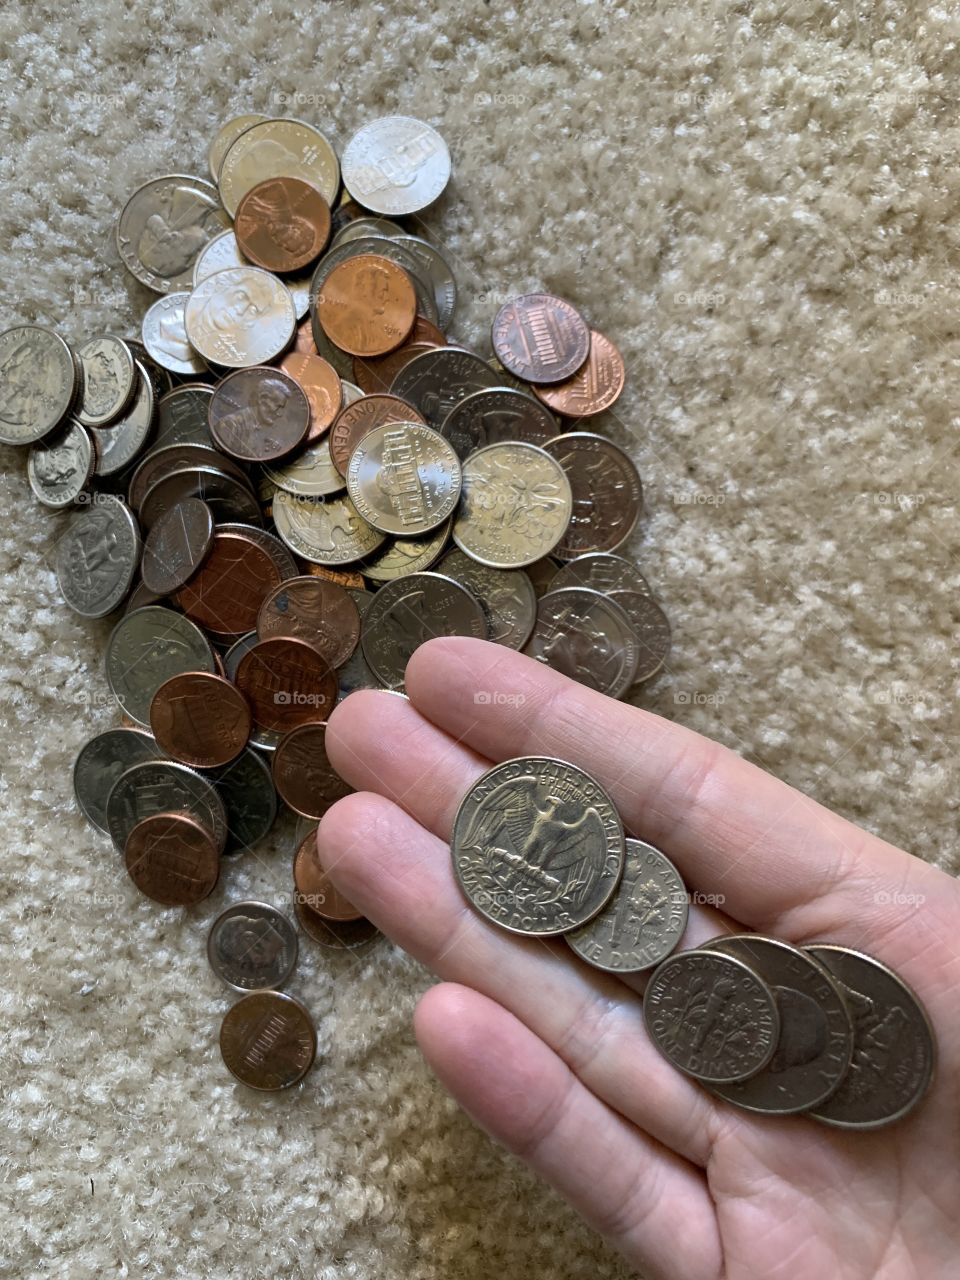 Counting the coins you save for a rainy day